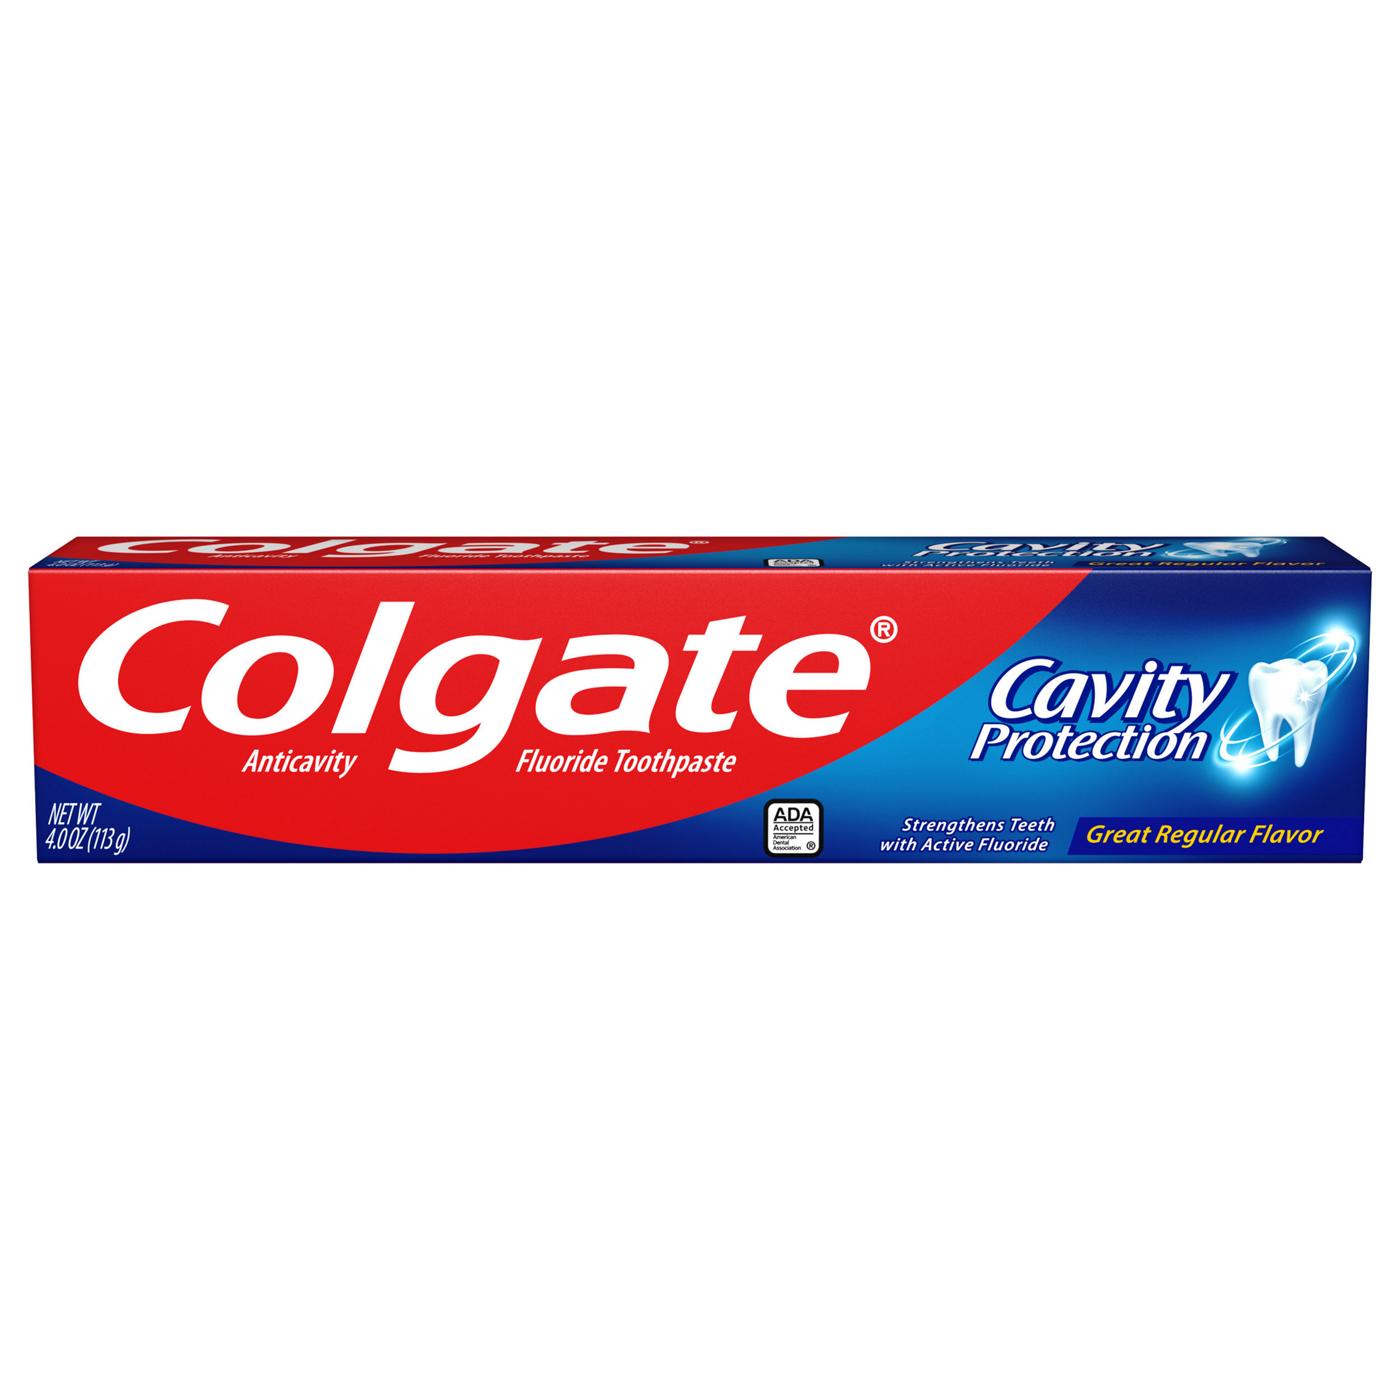 Colgate Cavity Protection Anticavity Toothpaste; image 1 of 2